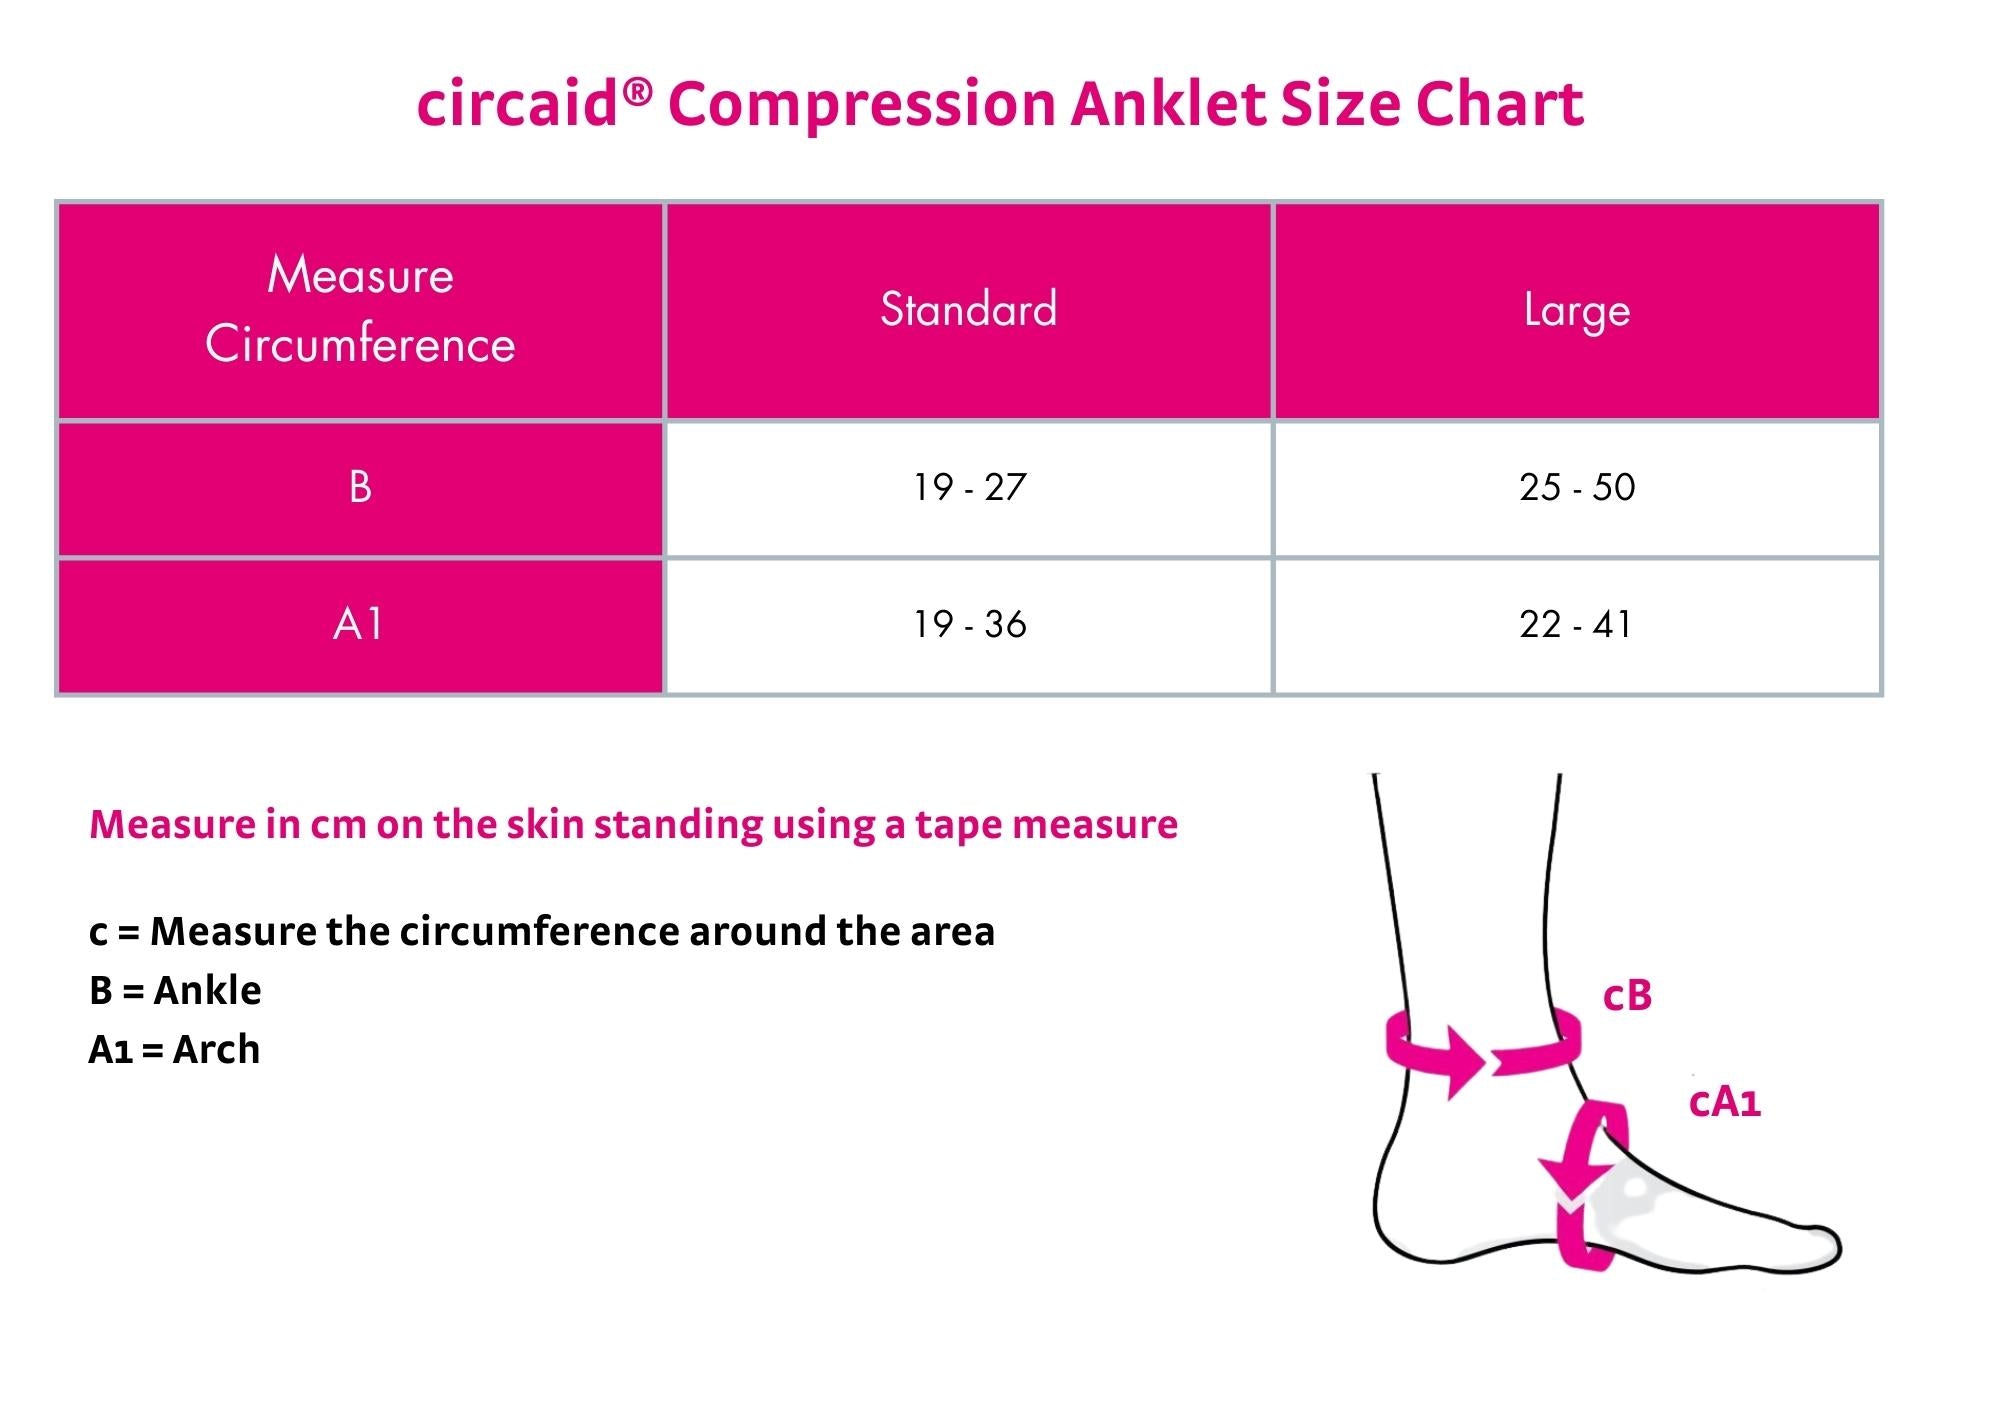 circaid® compression anklet